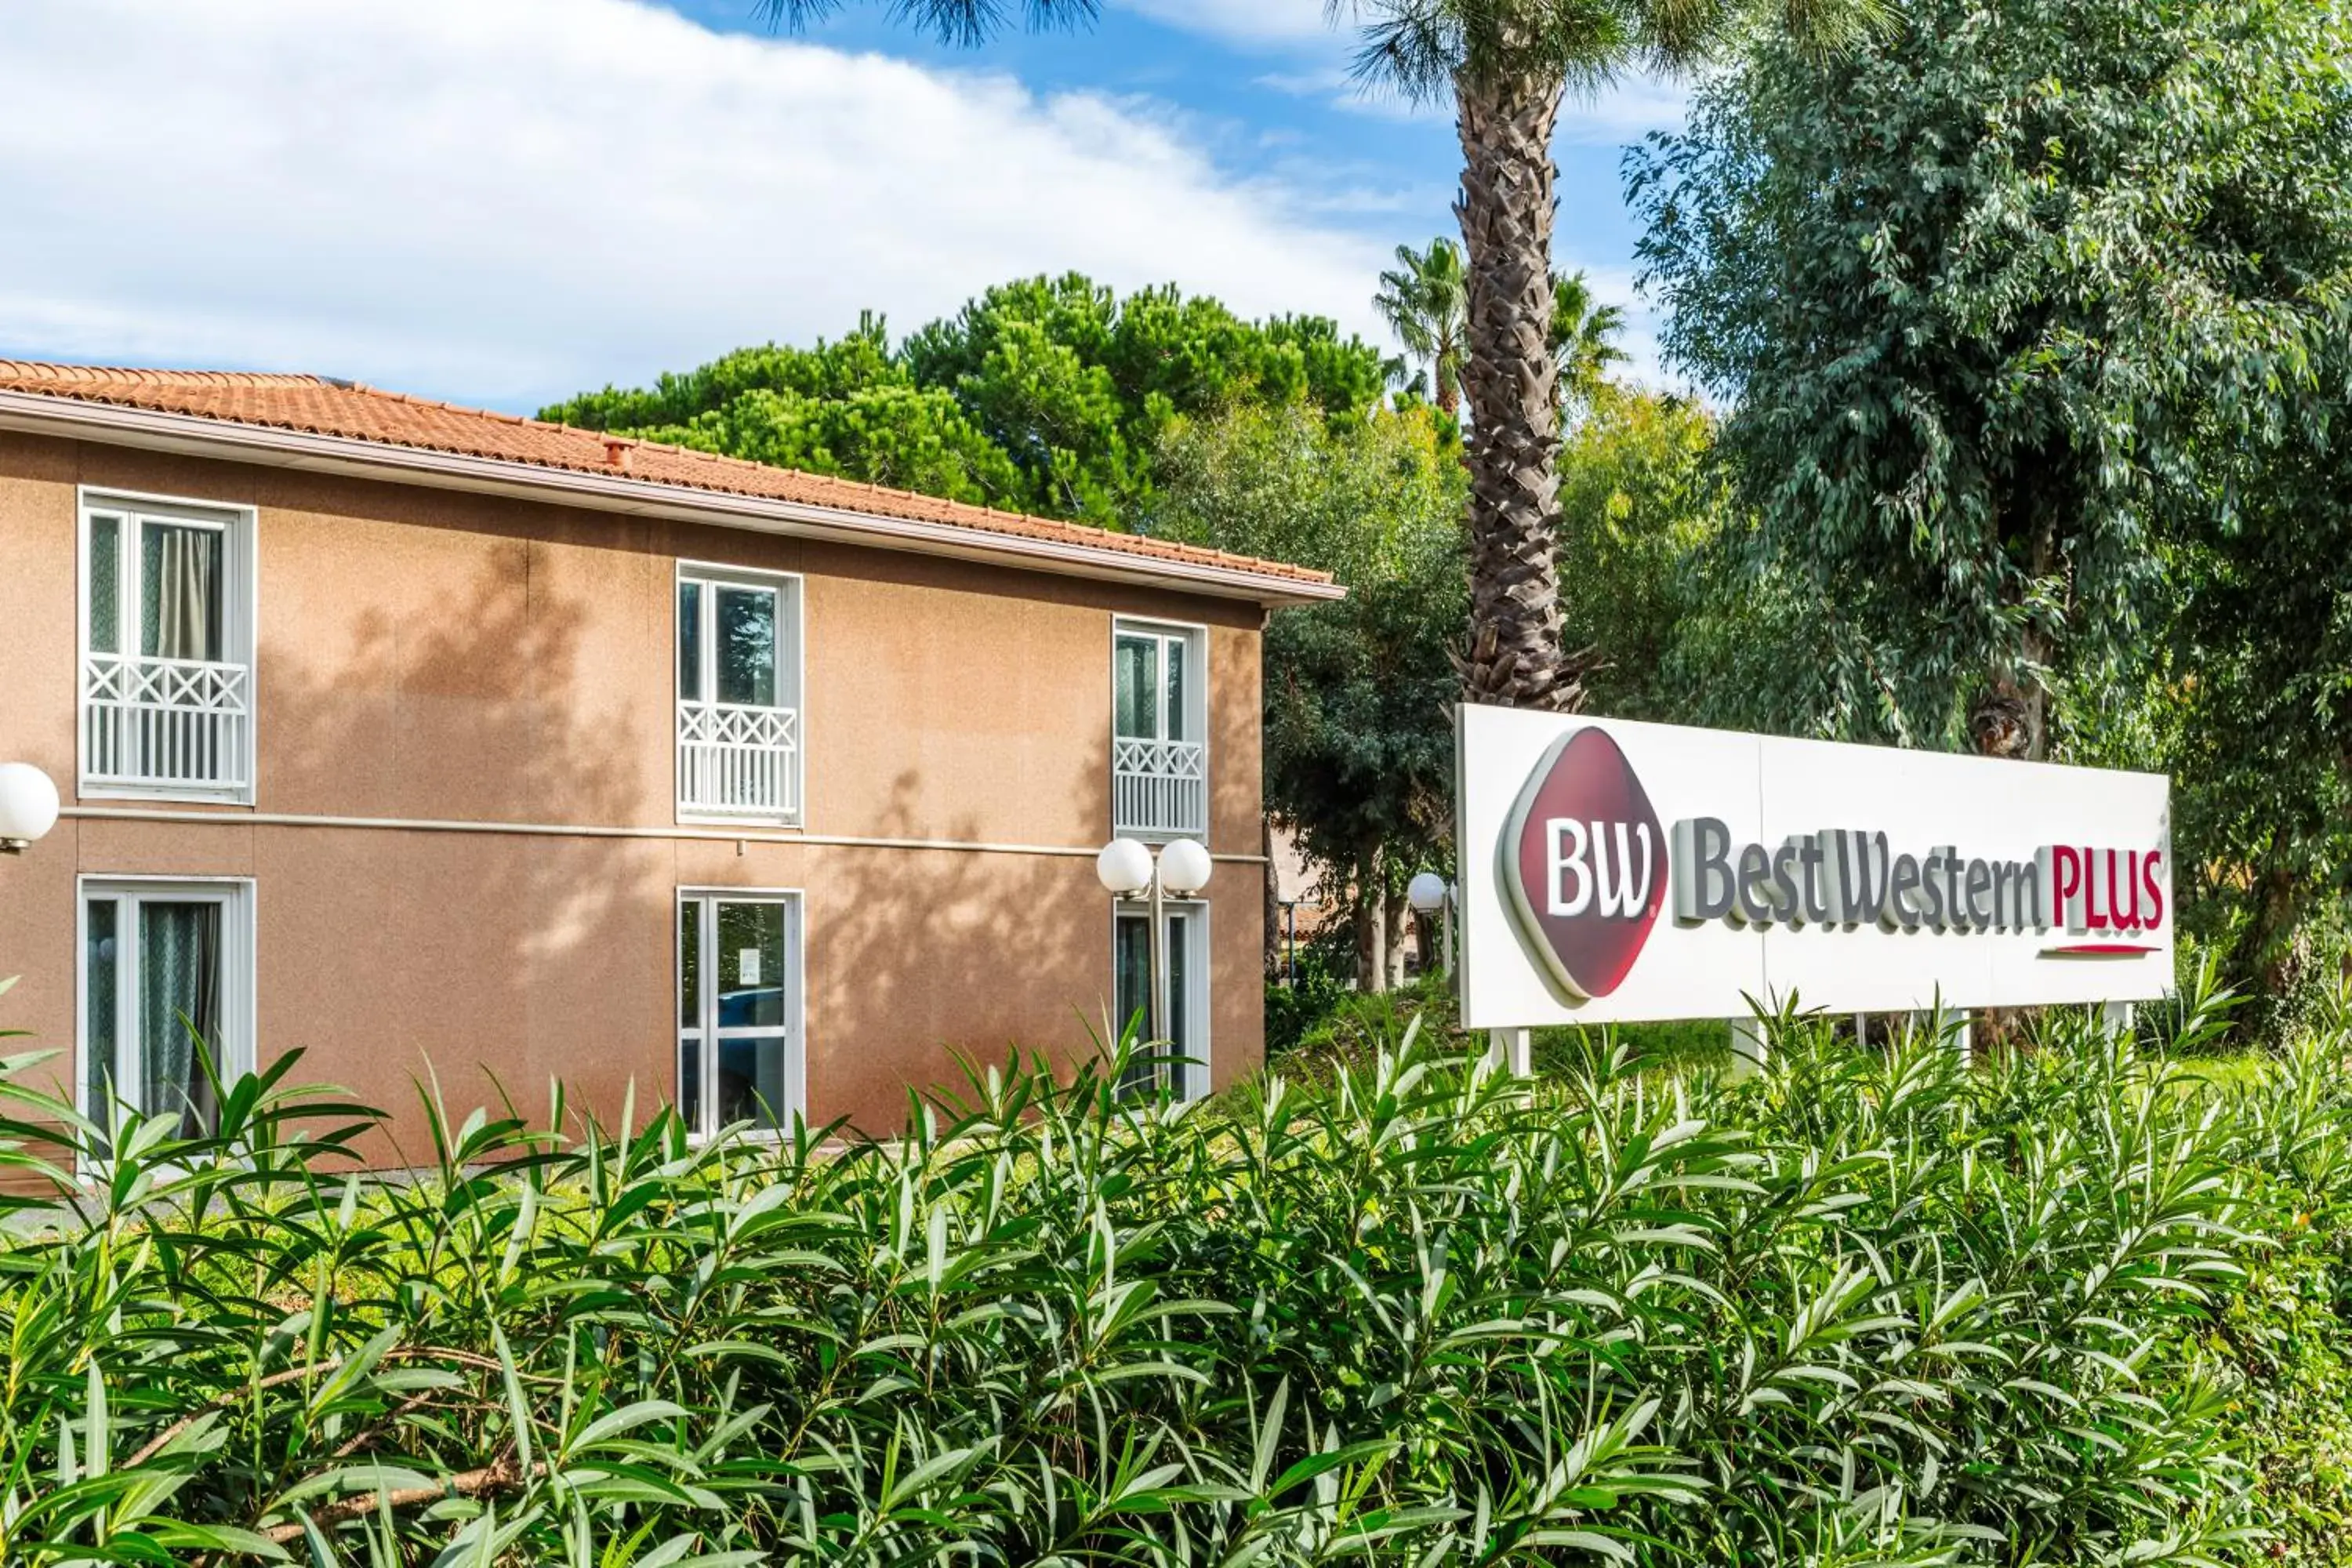 Property logo or sign, Property Building in Best Western Plus Hyeres Cote D'Azur